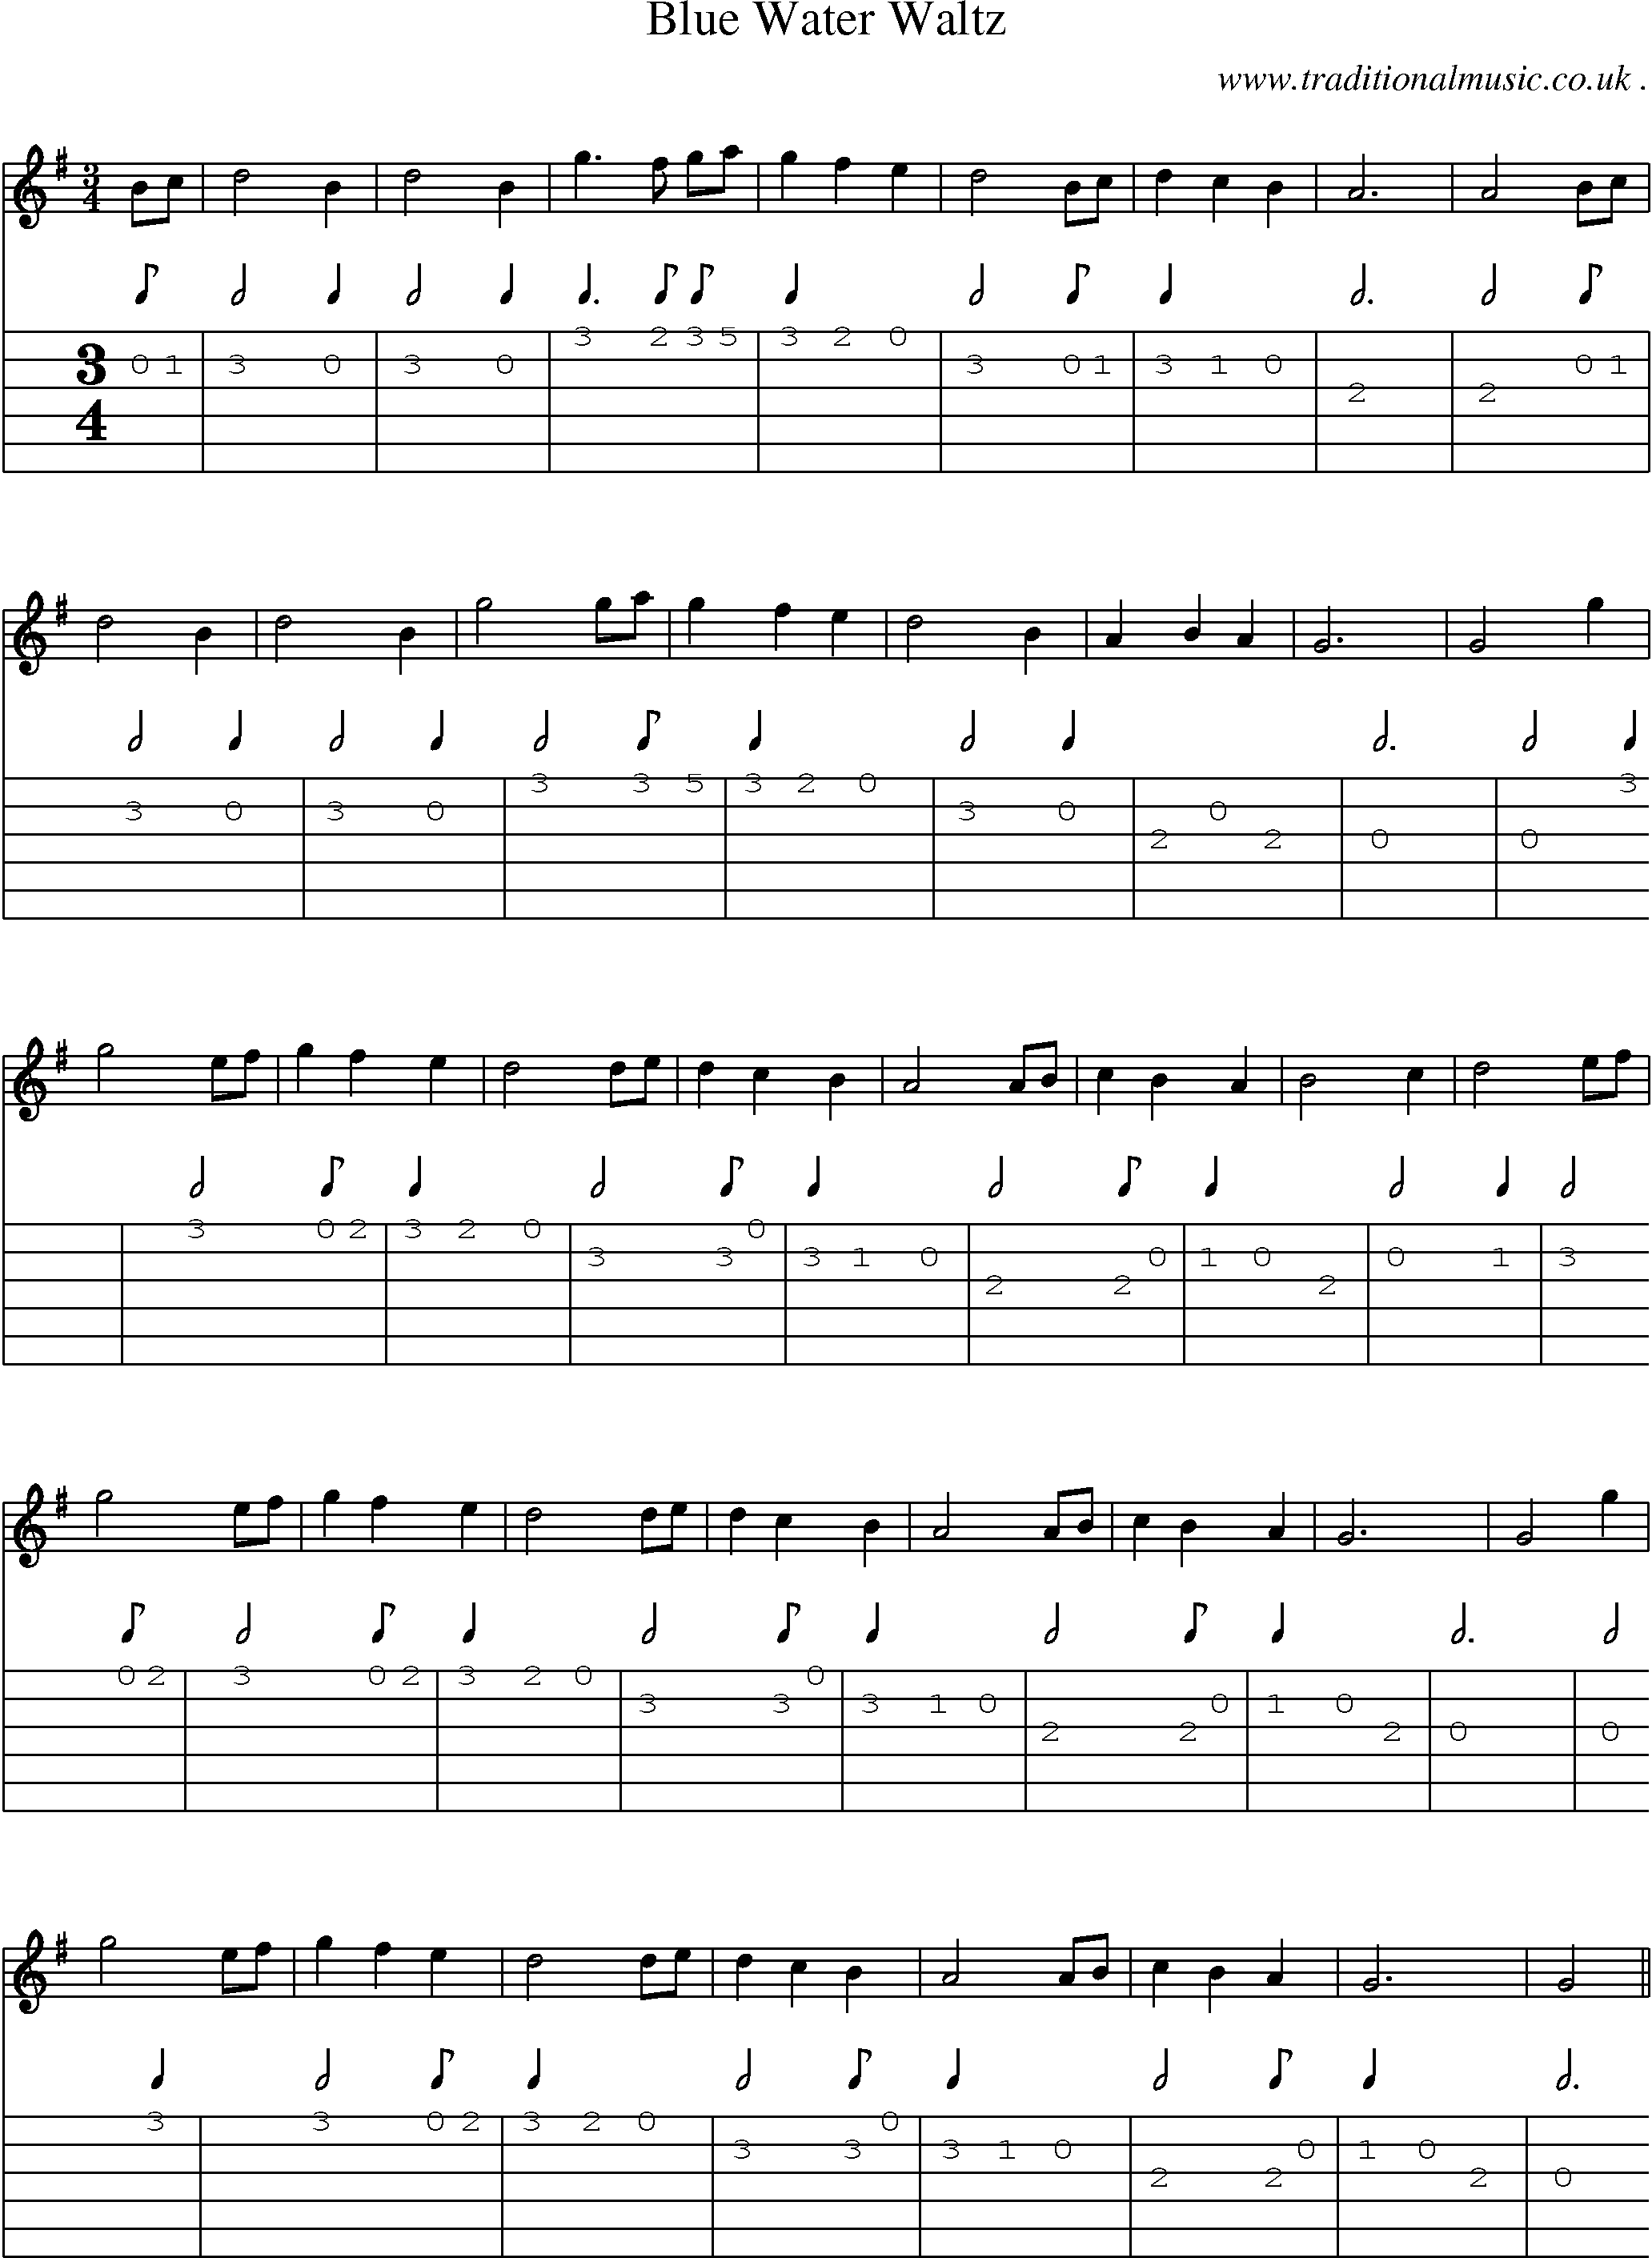 Sheet-music  score, Chords and Guitar Tabs for Blue Water Waltz